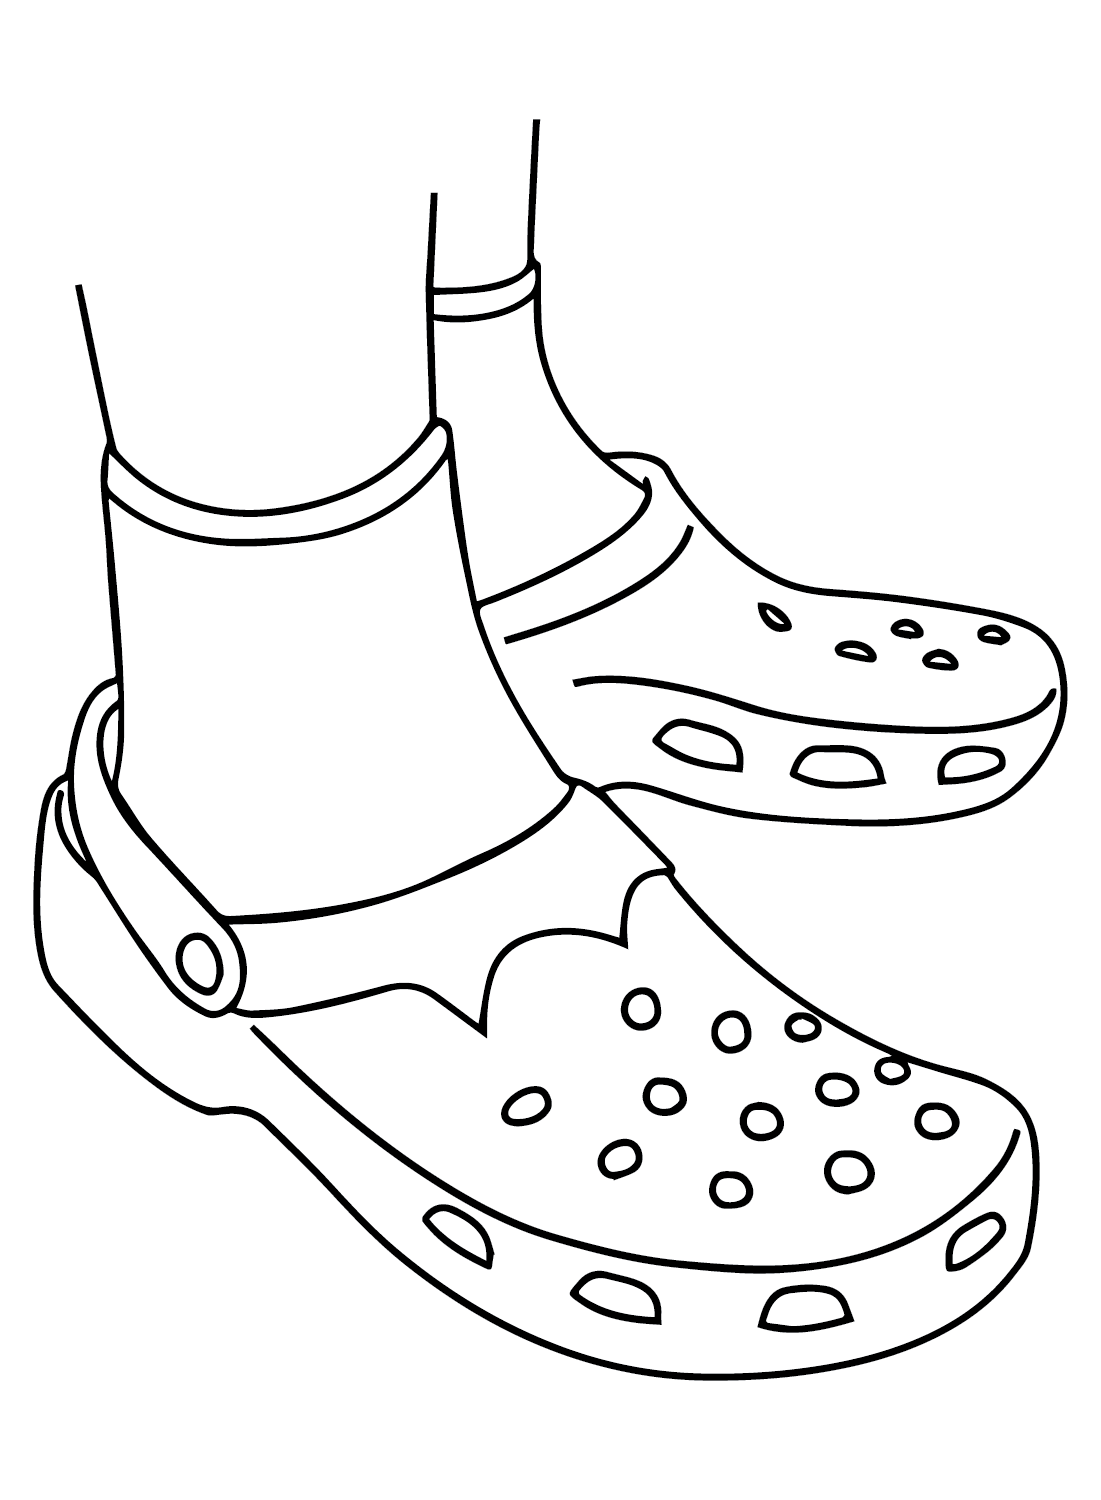 Crocs Images Coloring Pages - Crocs Coloring Pages - Coloring Pages For  Kids And Adults